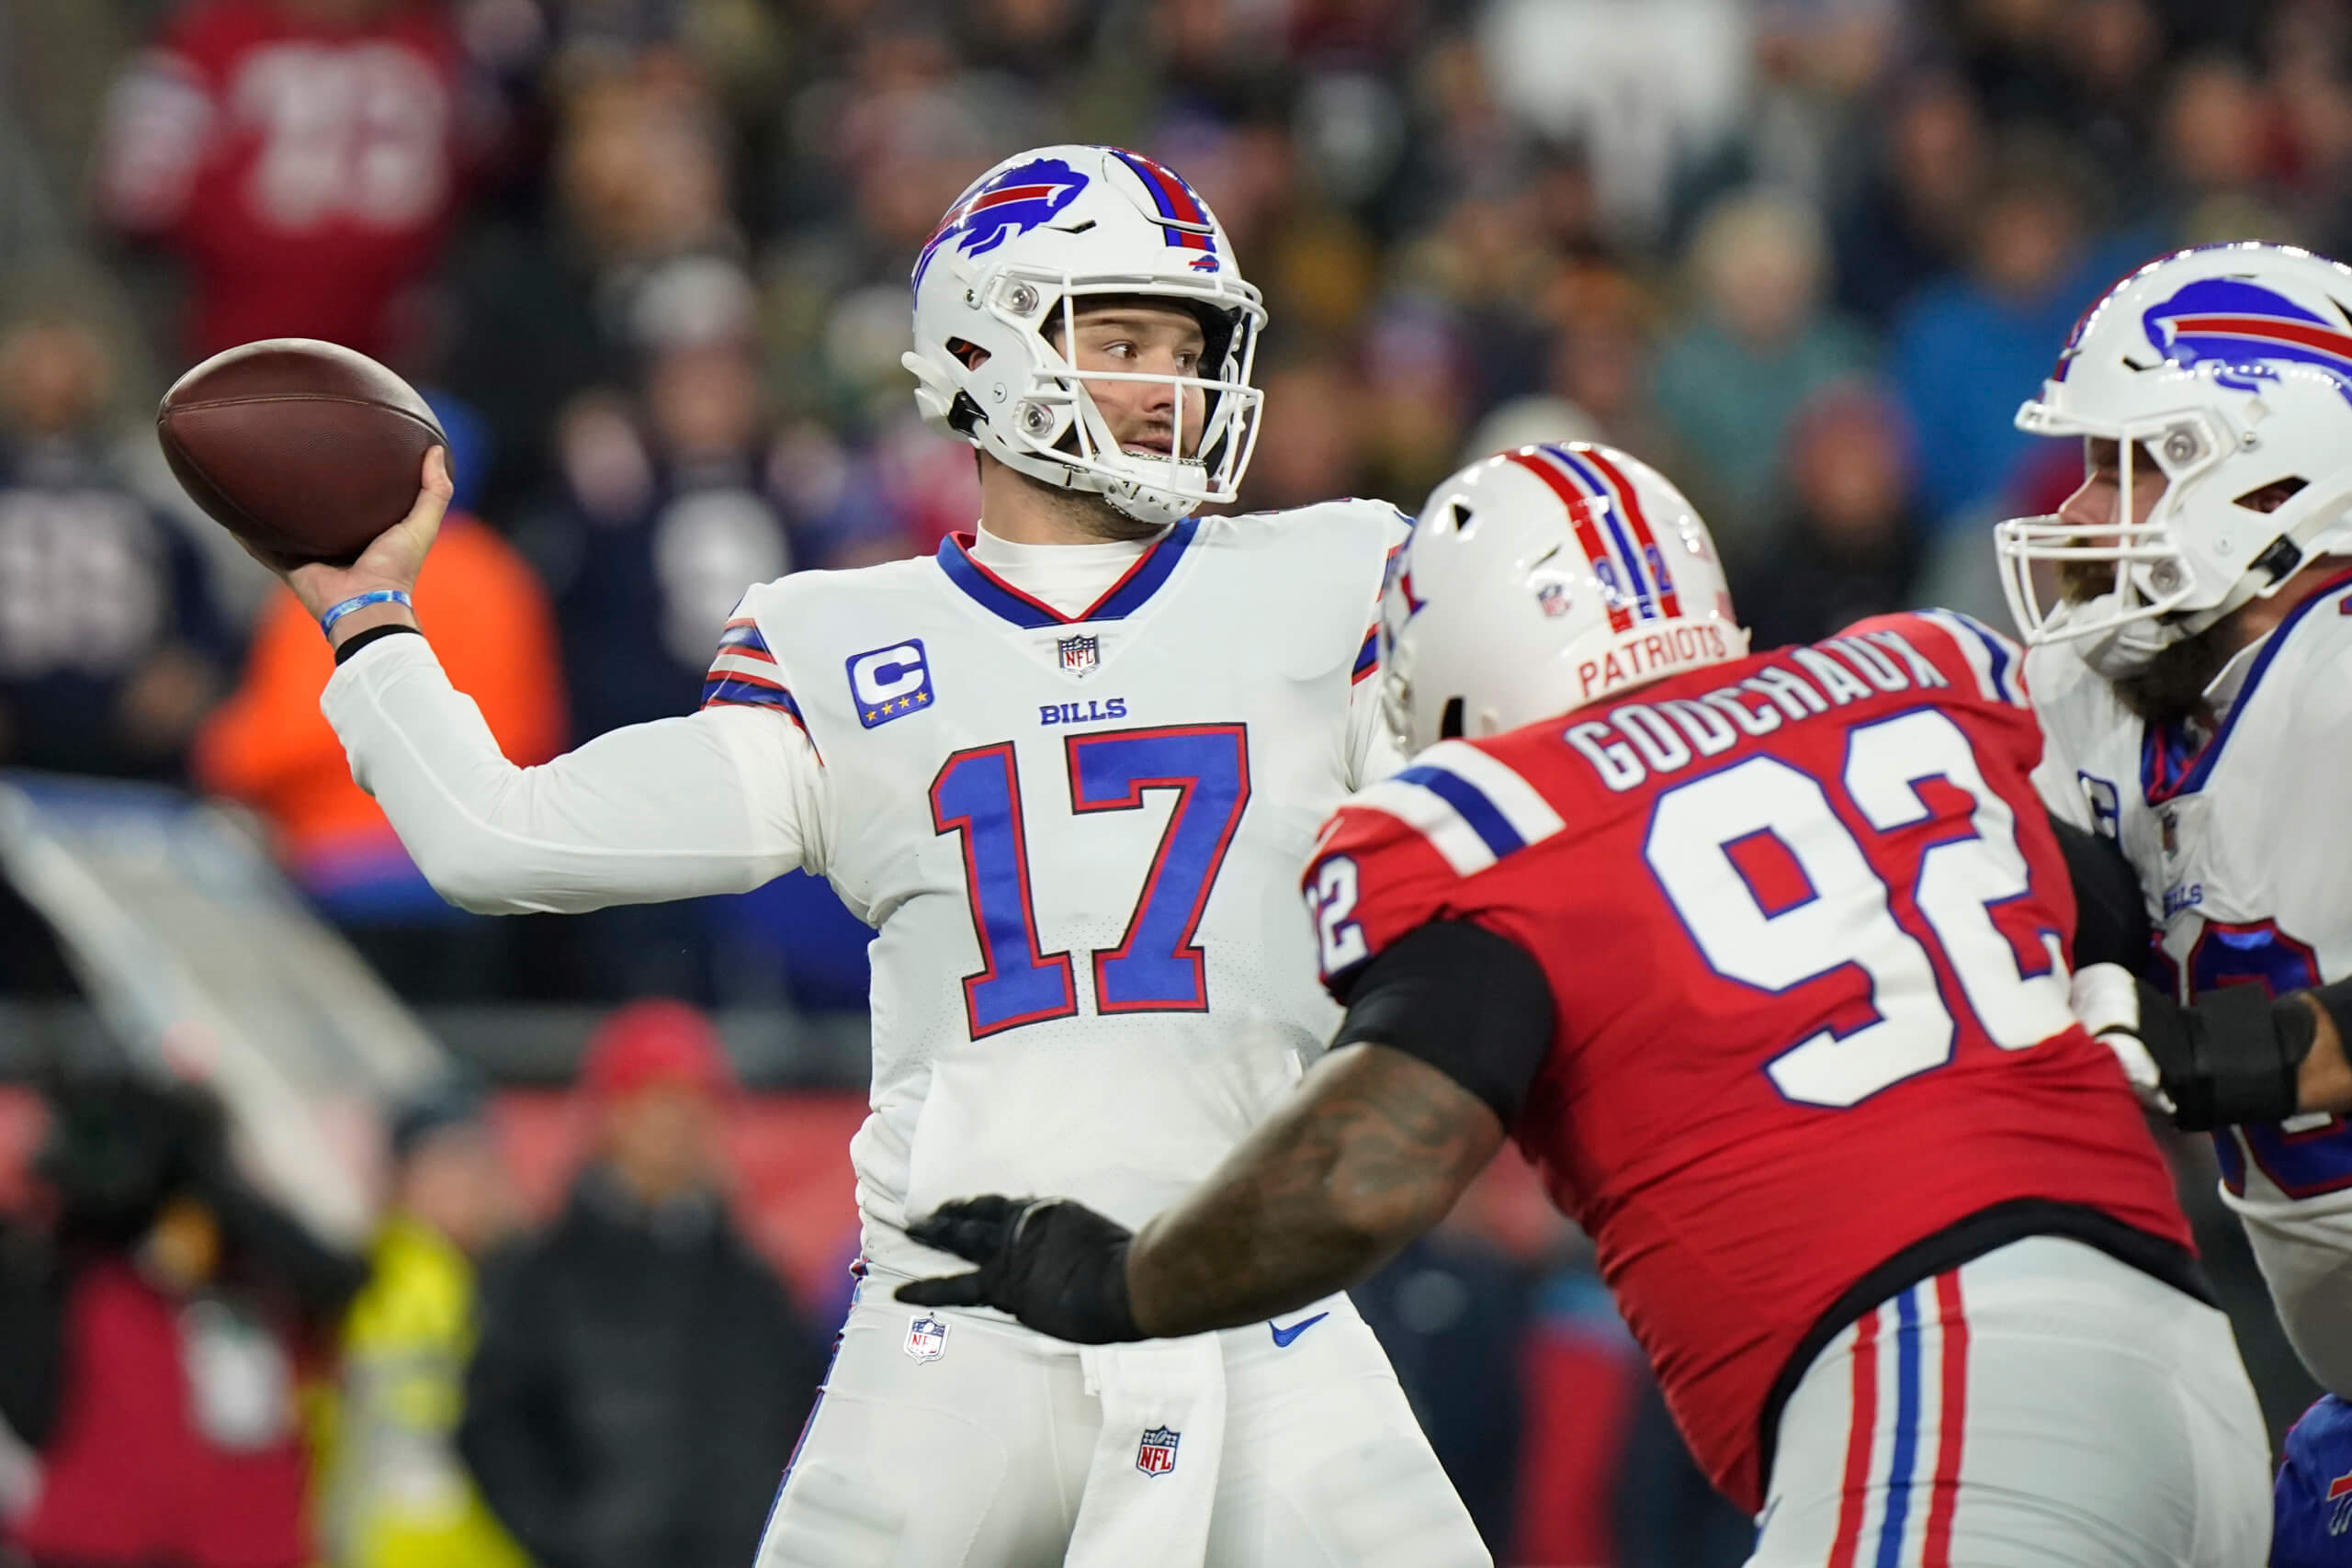 Quick observations from Patriots' wild 29-25 win over the Bills